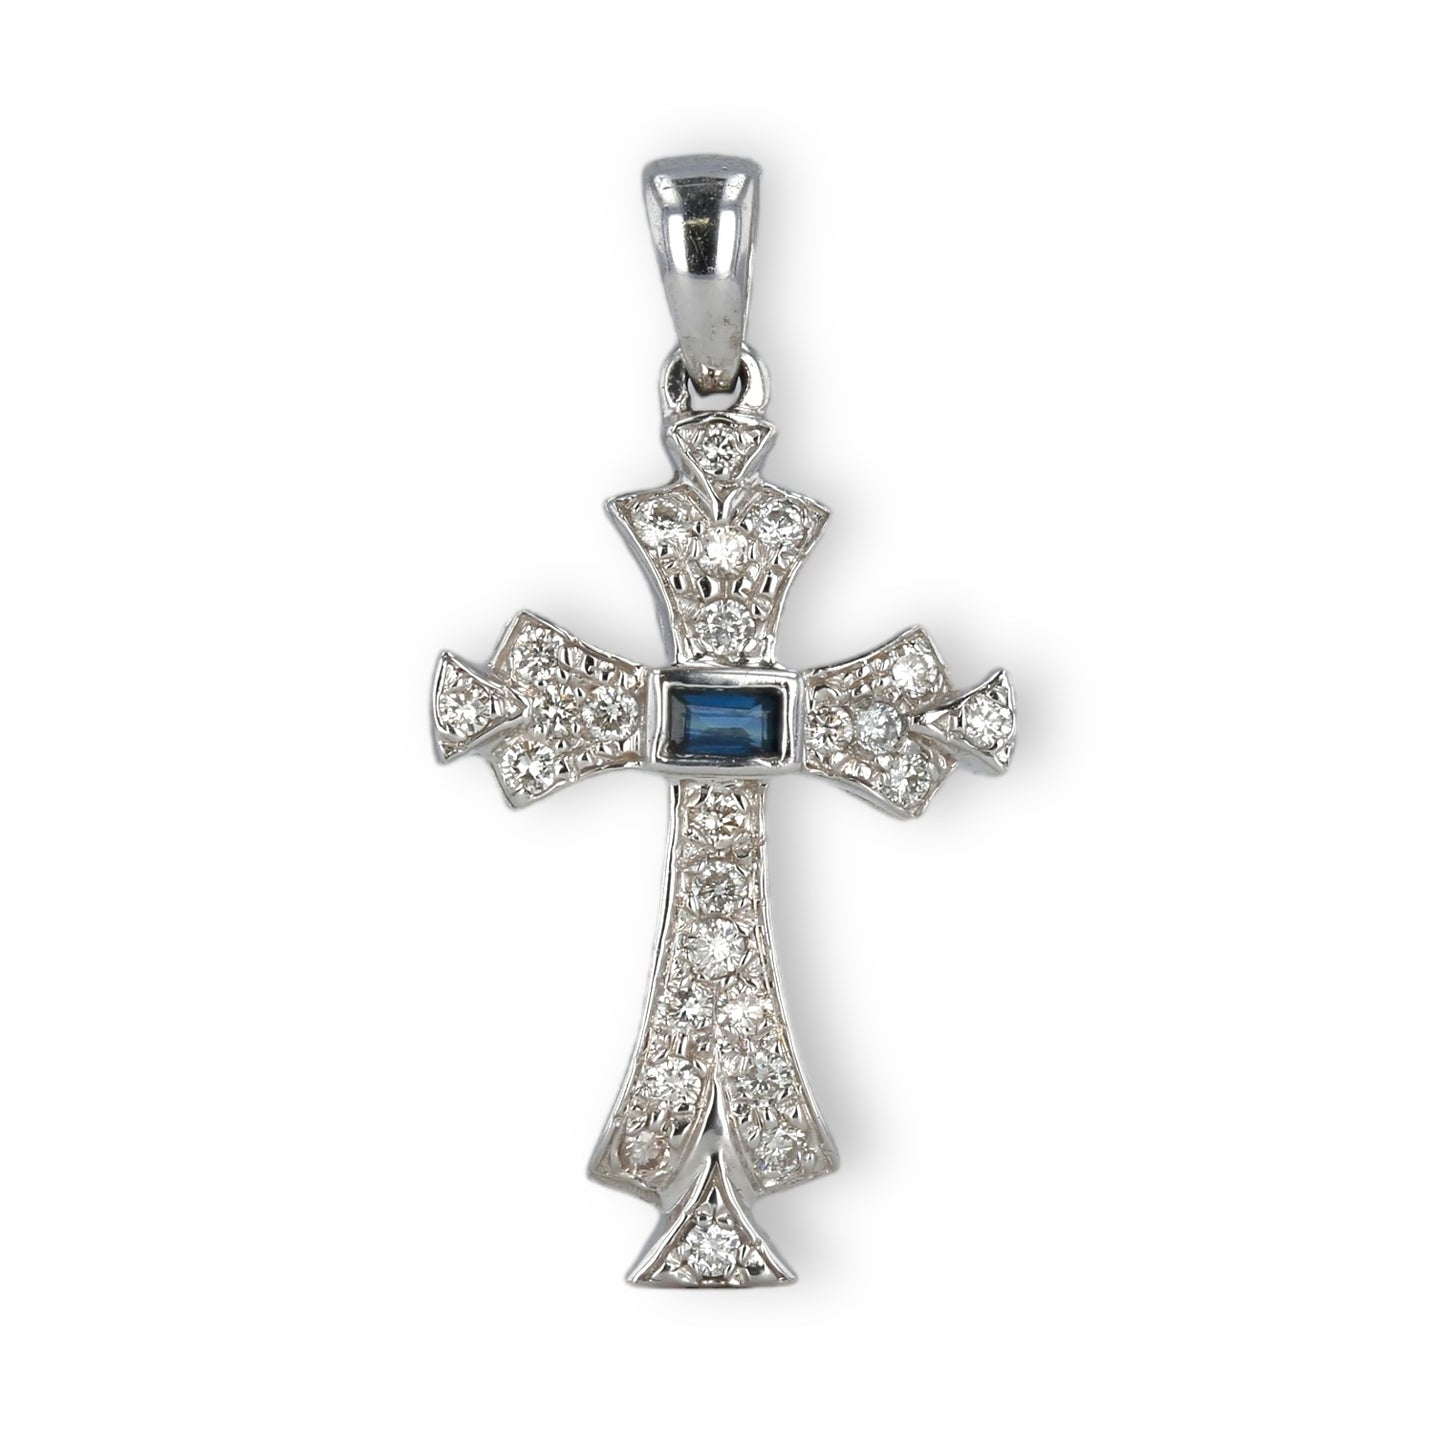 White Gold Cross 14k pendant with Diamonds and Sapphire